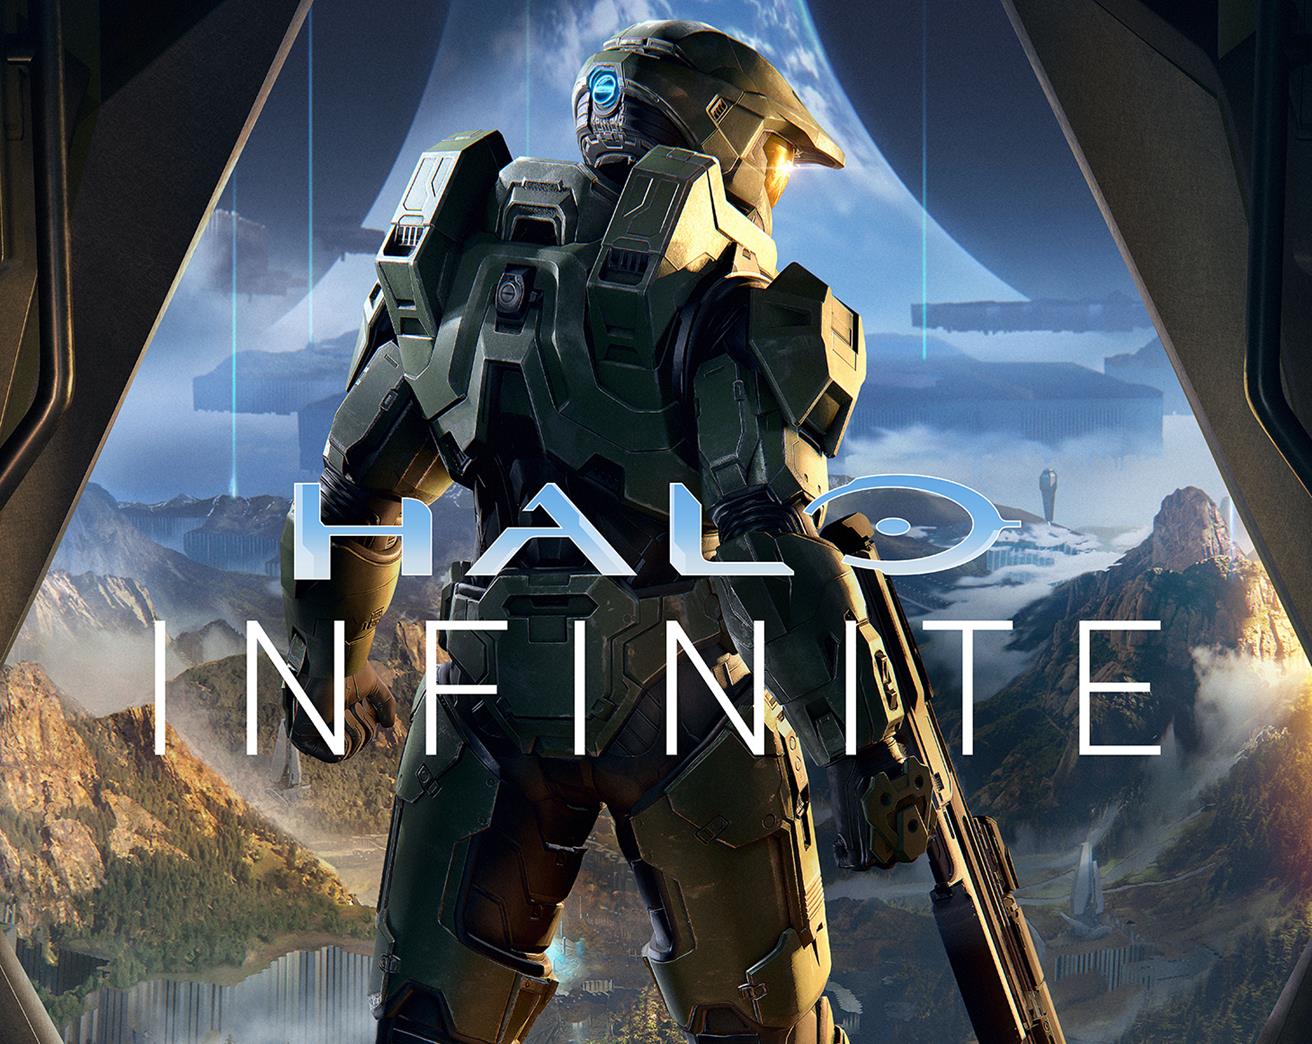 Image for Halo Infinite's next big moment is E3 2020, but beta tests are coming